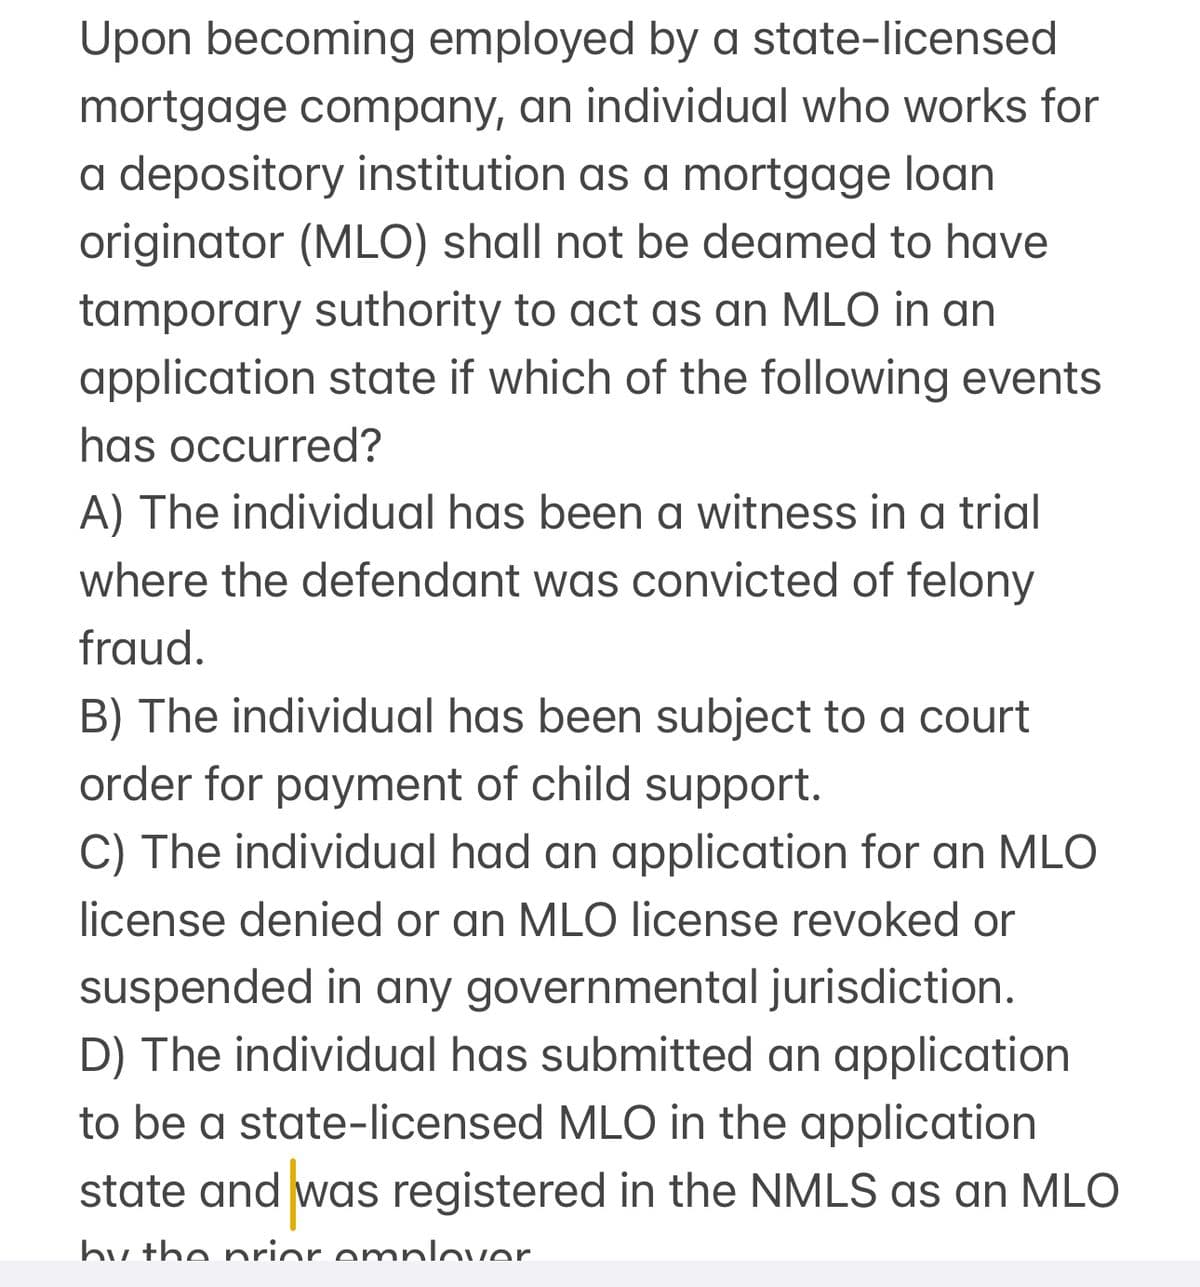 Upon becoming employed by a state-licensed
mortgage company, an individual who works for
a depository institution as a mortgage loan
originator (MLO) shall not be deamed to have
tamporary suthority to act as an MLO in an
application state if which of the following events
has occurred?
A) The individual has been a witness in a trial
where the defendant was convicted of felony
fraud.
B) The individual has been subject to a court
order for payment of child support.
C) The individual had an application for an MLO
license denied or an MLO license revoked or
suspended in any governmental jurisdiction.
D) The individual has submitted an application
to be a state-licensed MLO in the application
state and was registered in the NMLS as an MLO
by the prior omplover